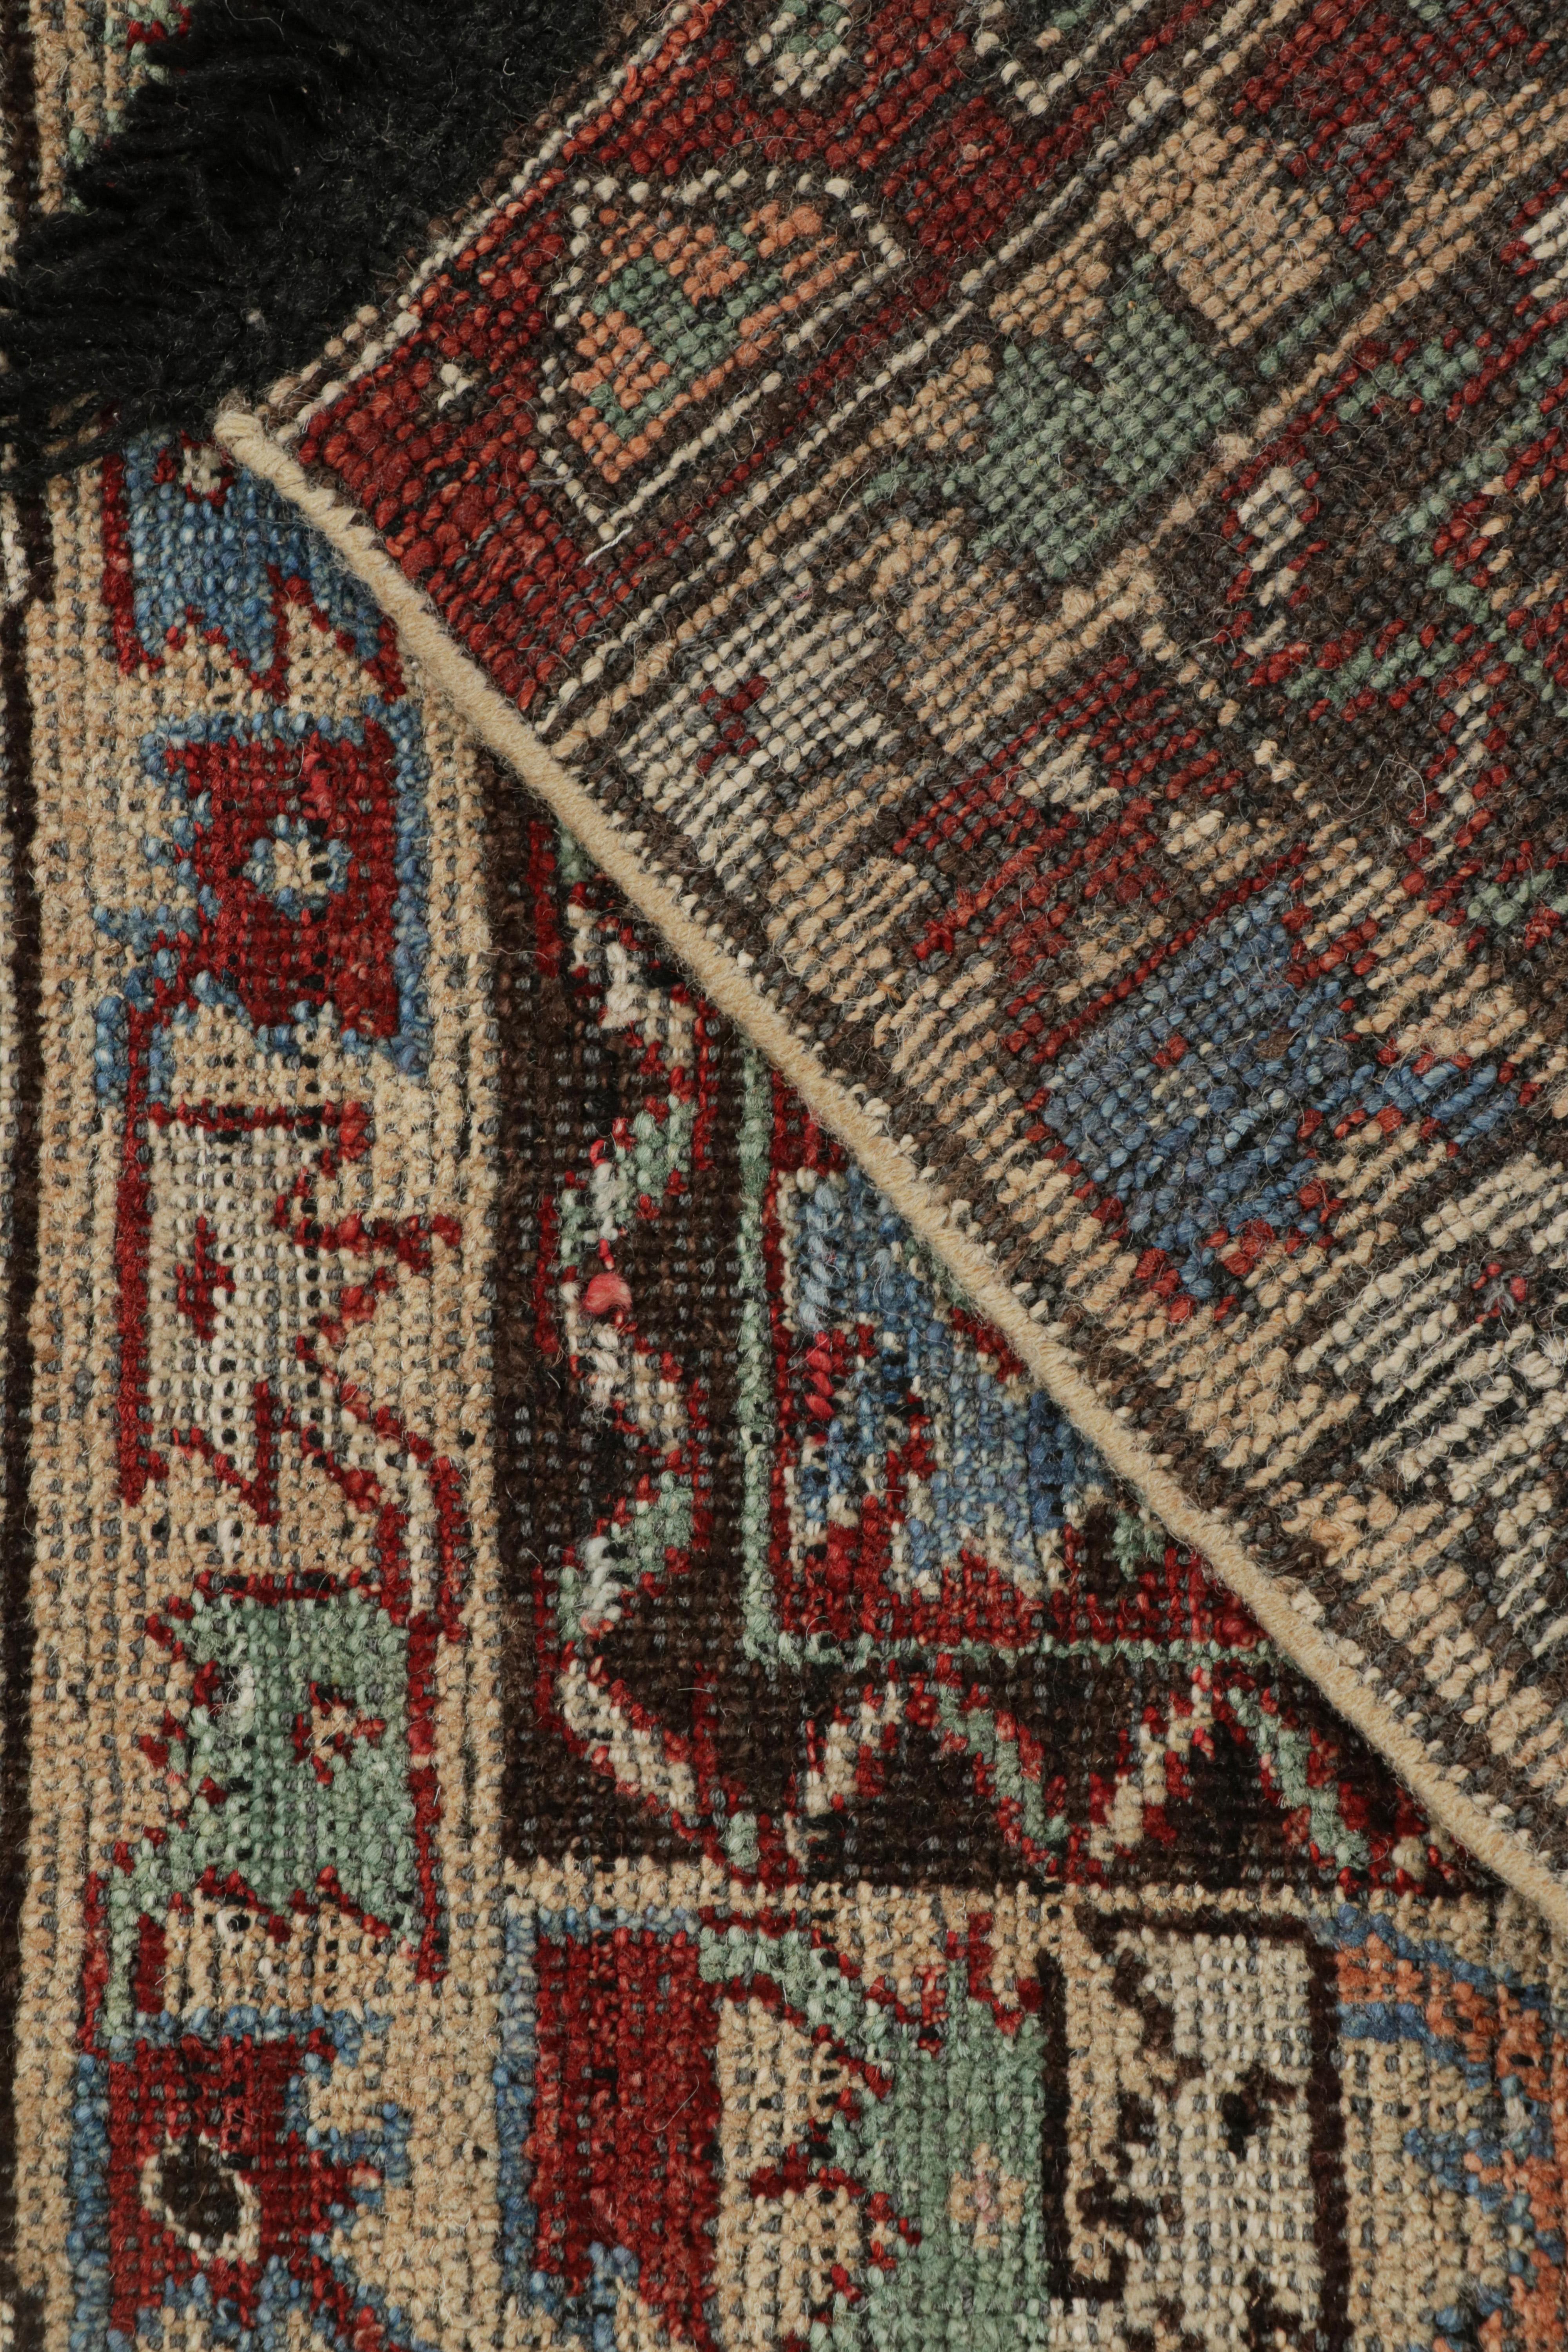 Wool Rug & Kilim’s Antique Tribal Style Rug in Red, Blue, Green & Black Patterns For Sale